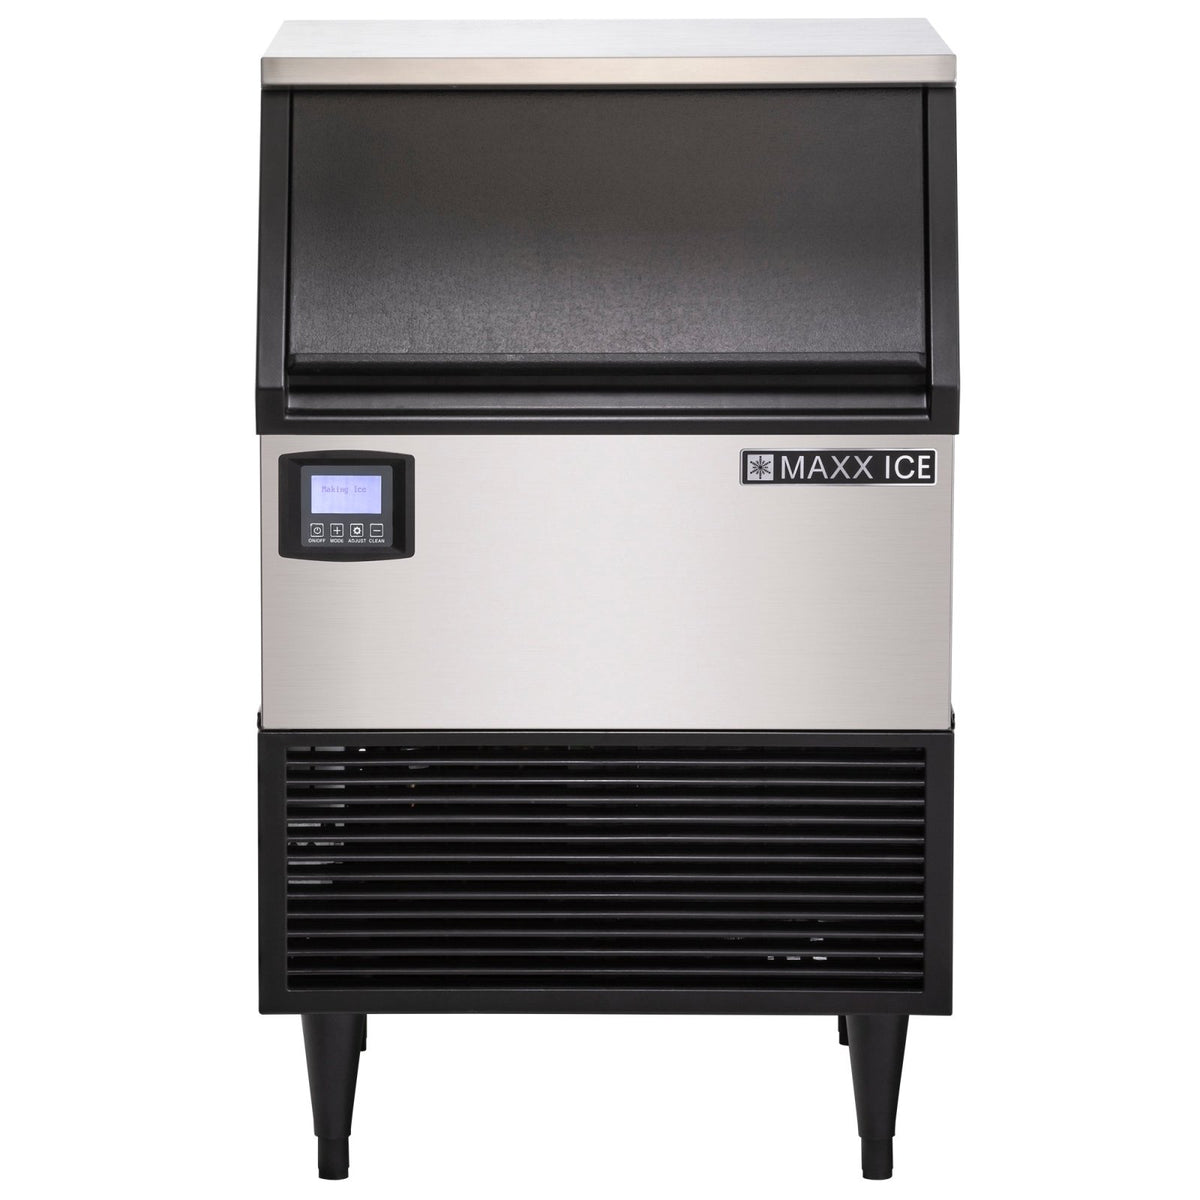 Maxx Ice MIM260NH Intelligent Series Ice Machine, 265 lbs, Half Dice Ice Cubes, 75 lbs Built - in Ice Storage Bin, Stainless Steel with Black Trim - TheChefStore.Com